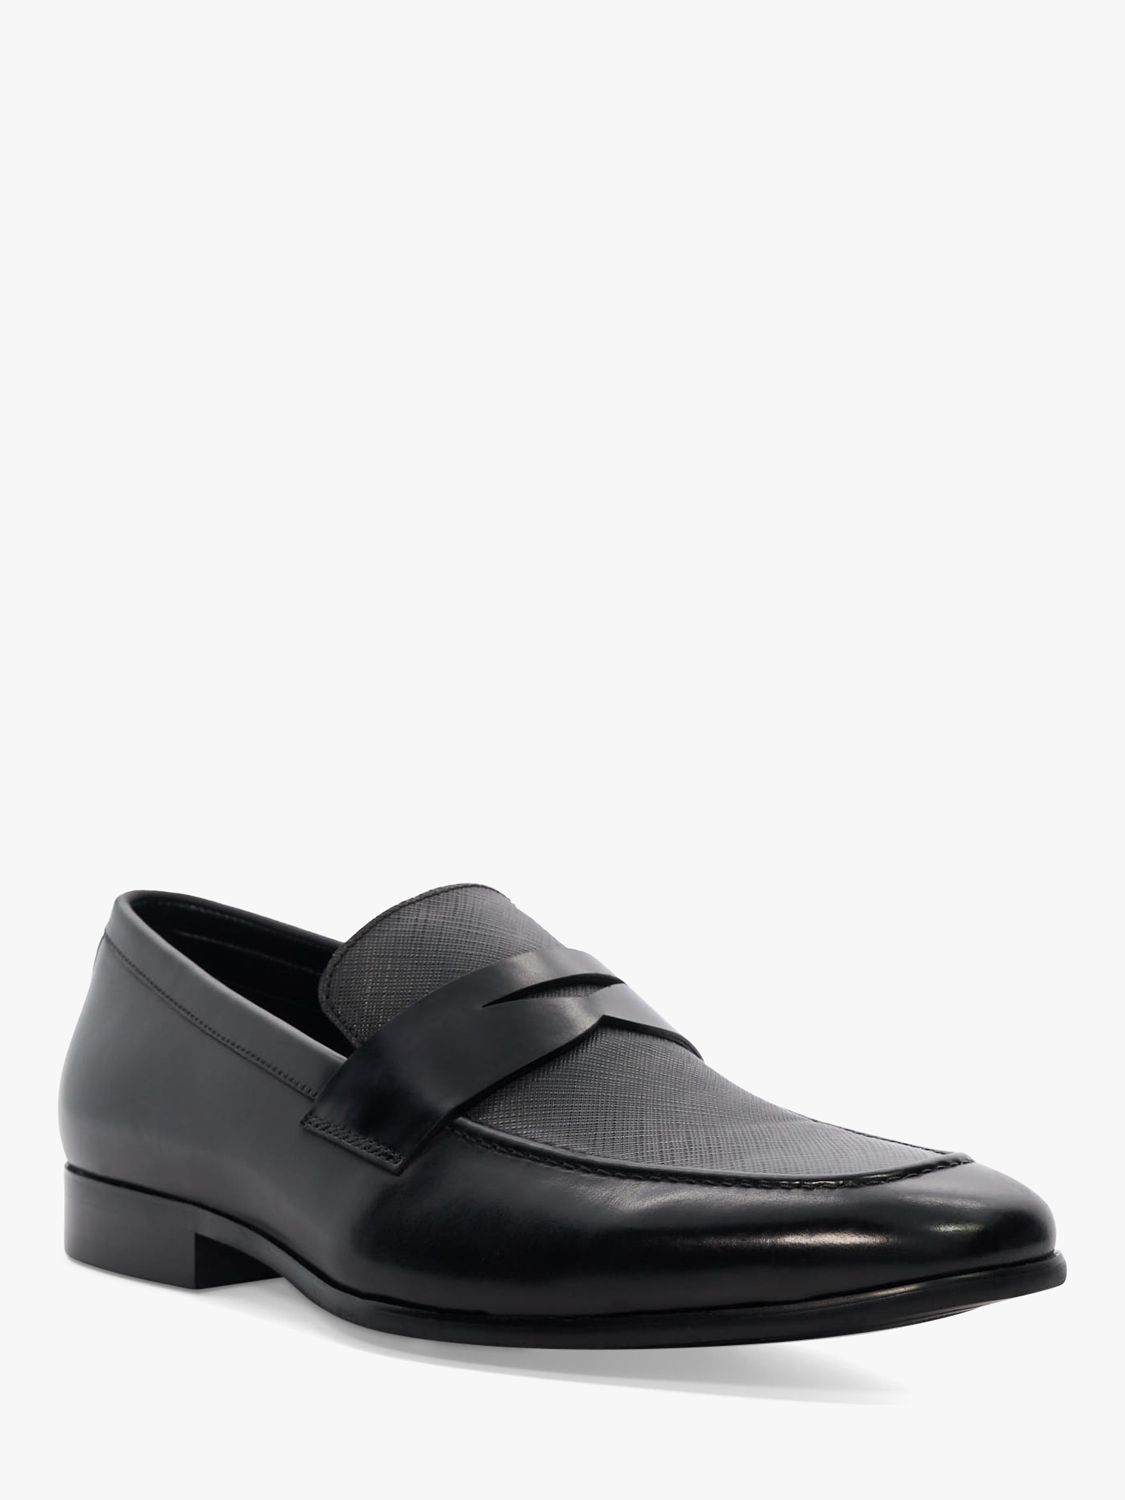 Dune Silvester Saffiano Leather Dress Loafers, Black at John Lewis ...